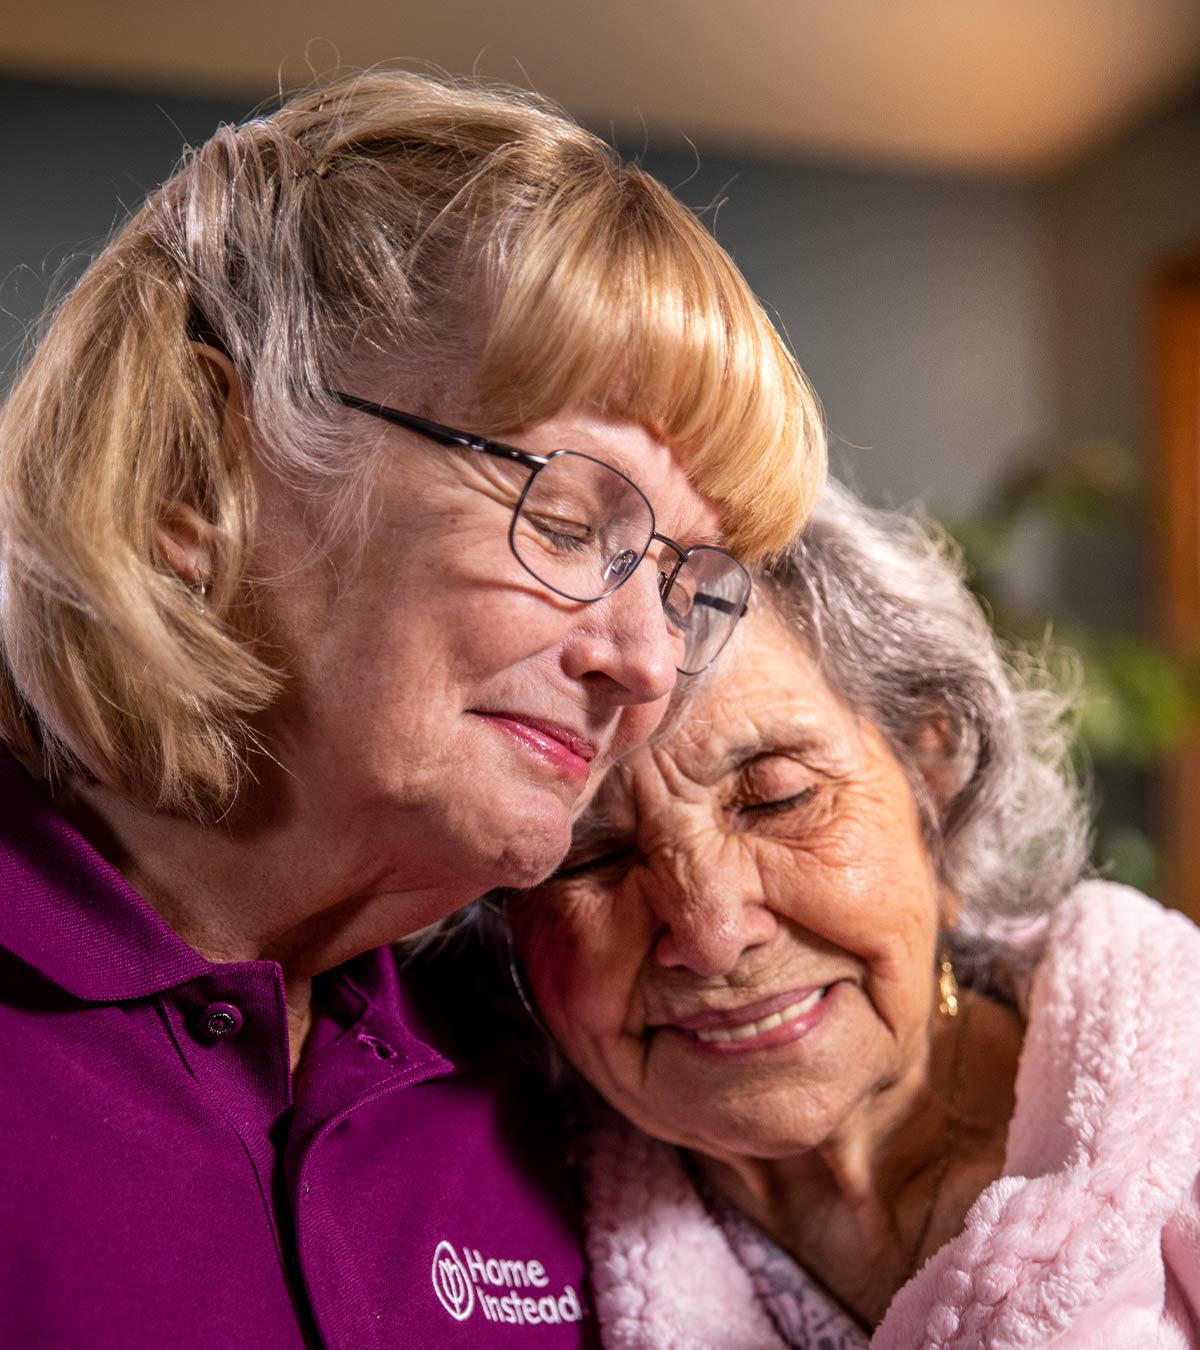 CAREGiver providing in-home senior care services. Home Instead of Waukee, IA provides Elder Care to aging adults. 